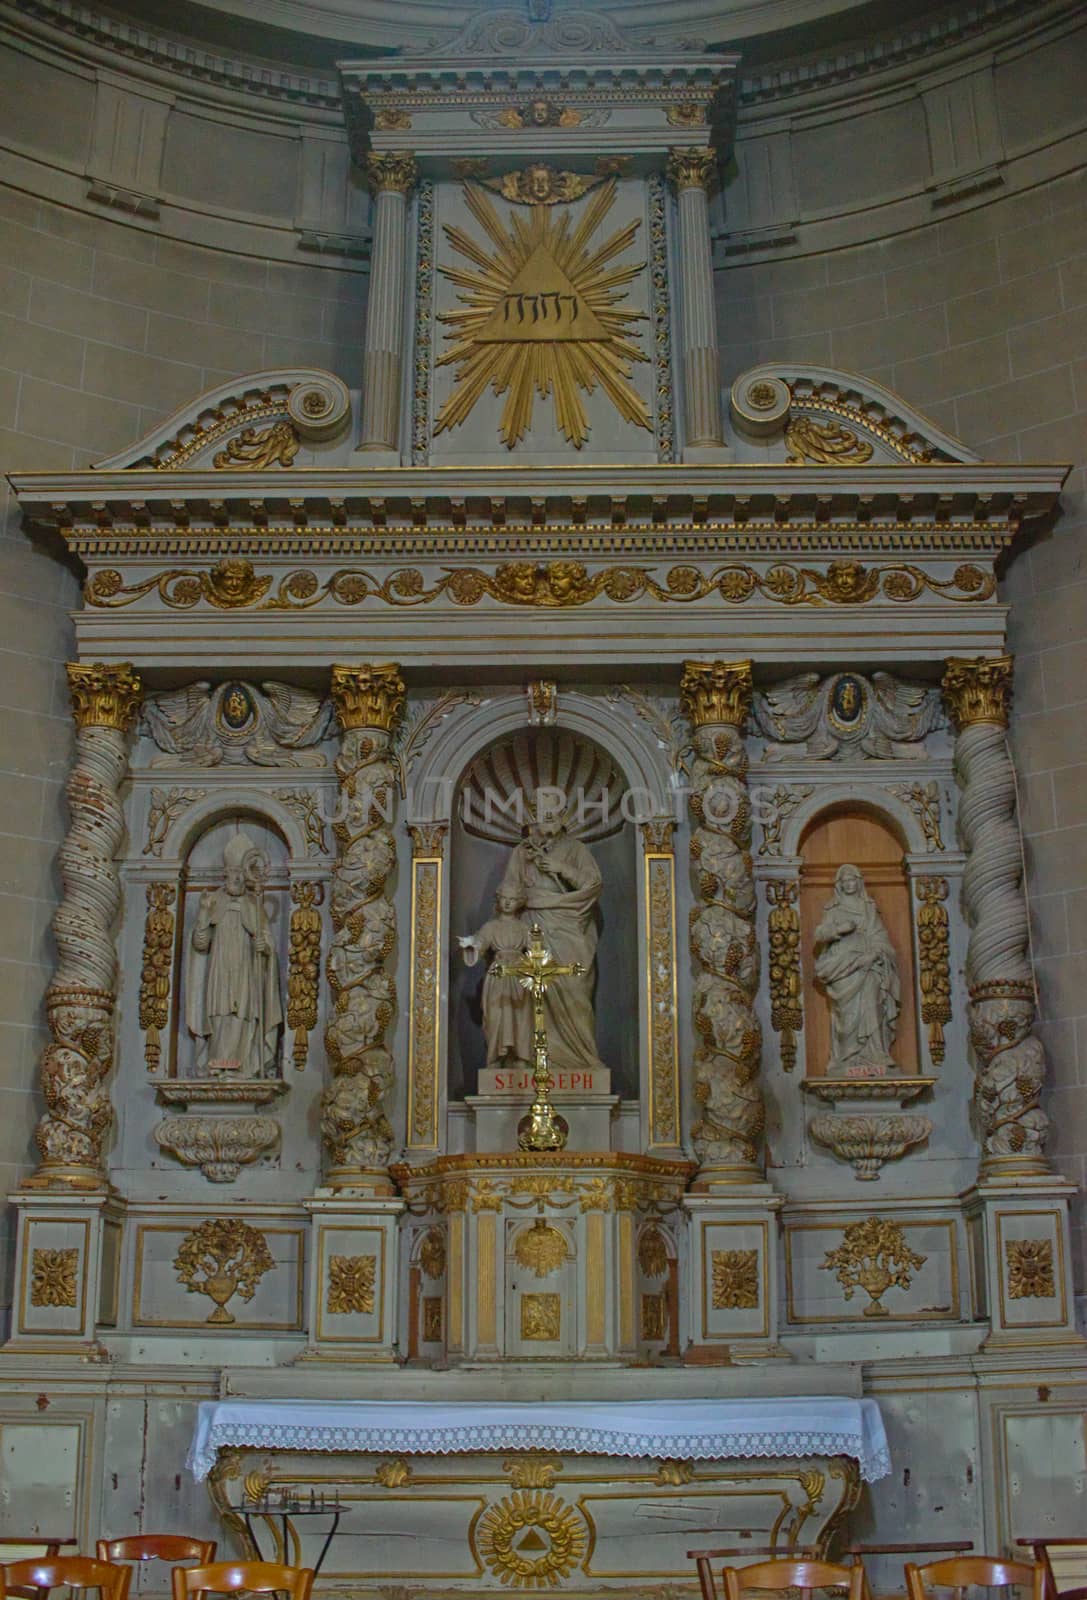 Altar with statues of saints in Catholic cathedral at Avranches, France by sheriffkule